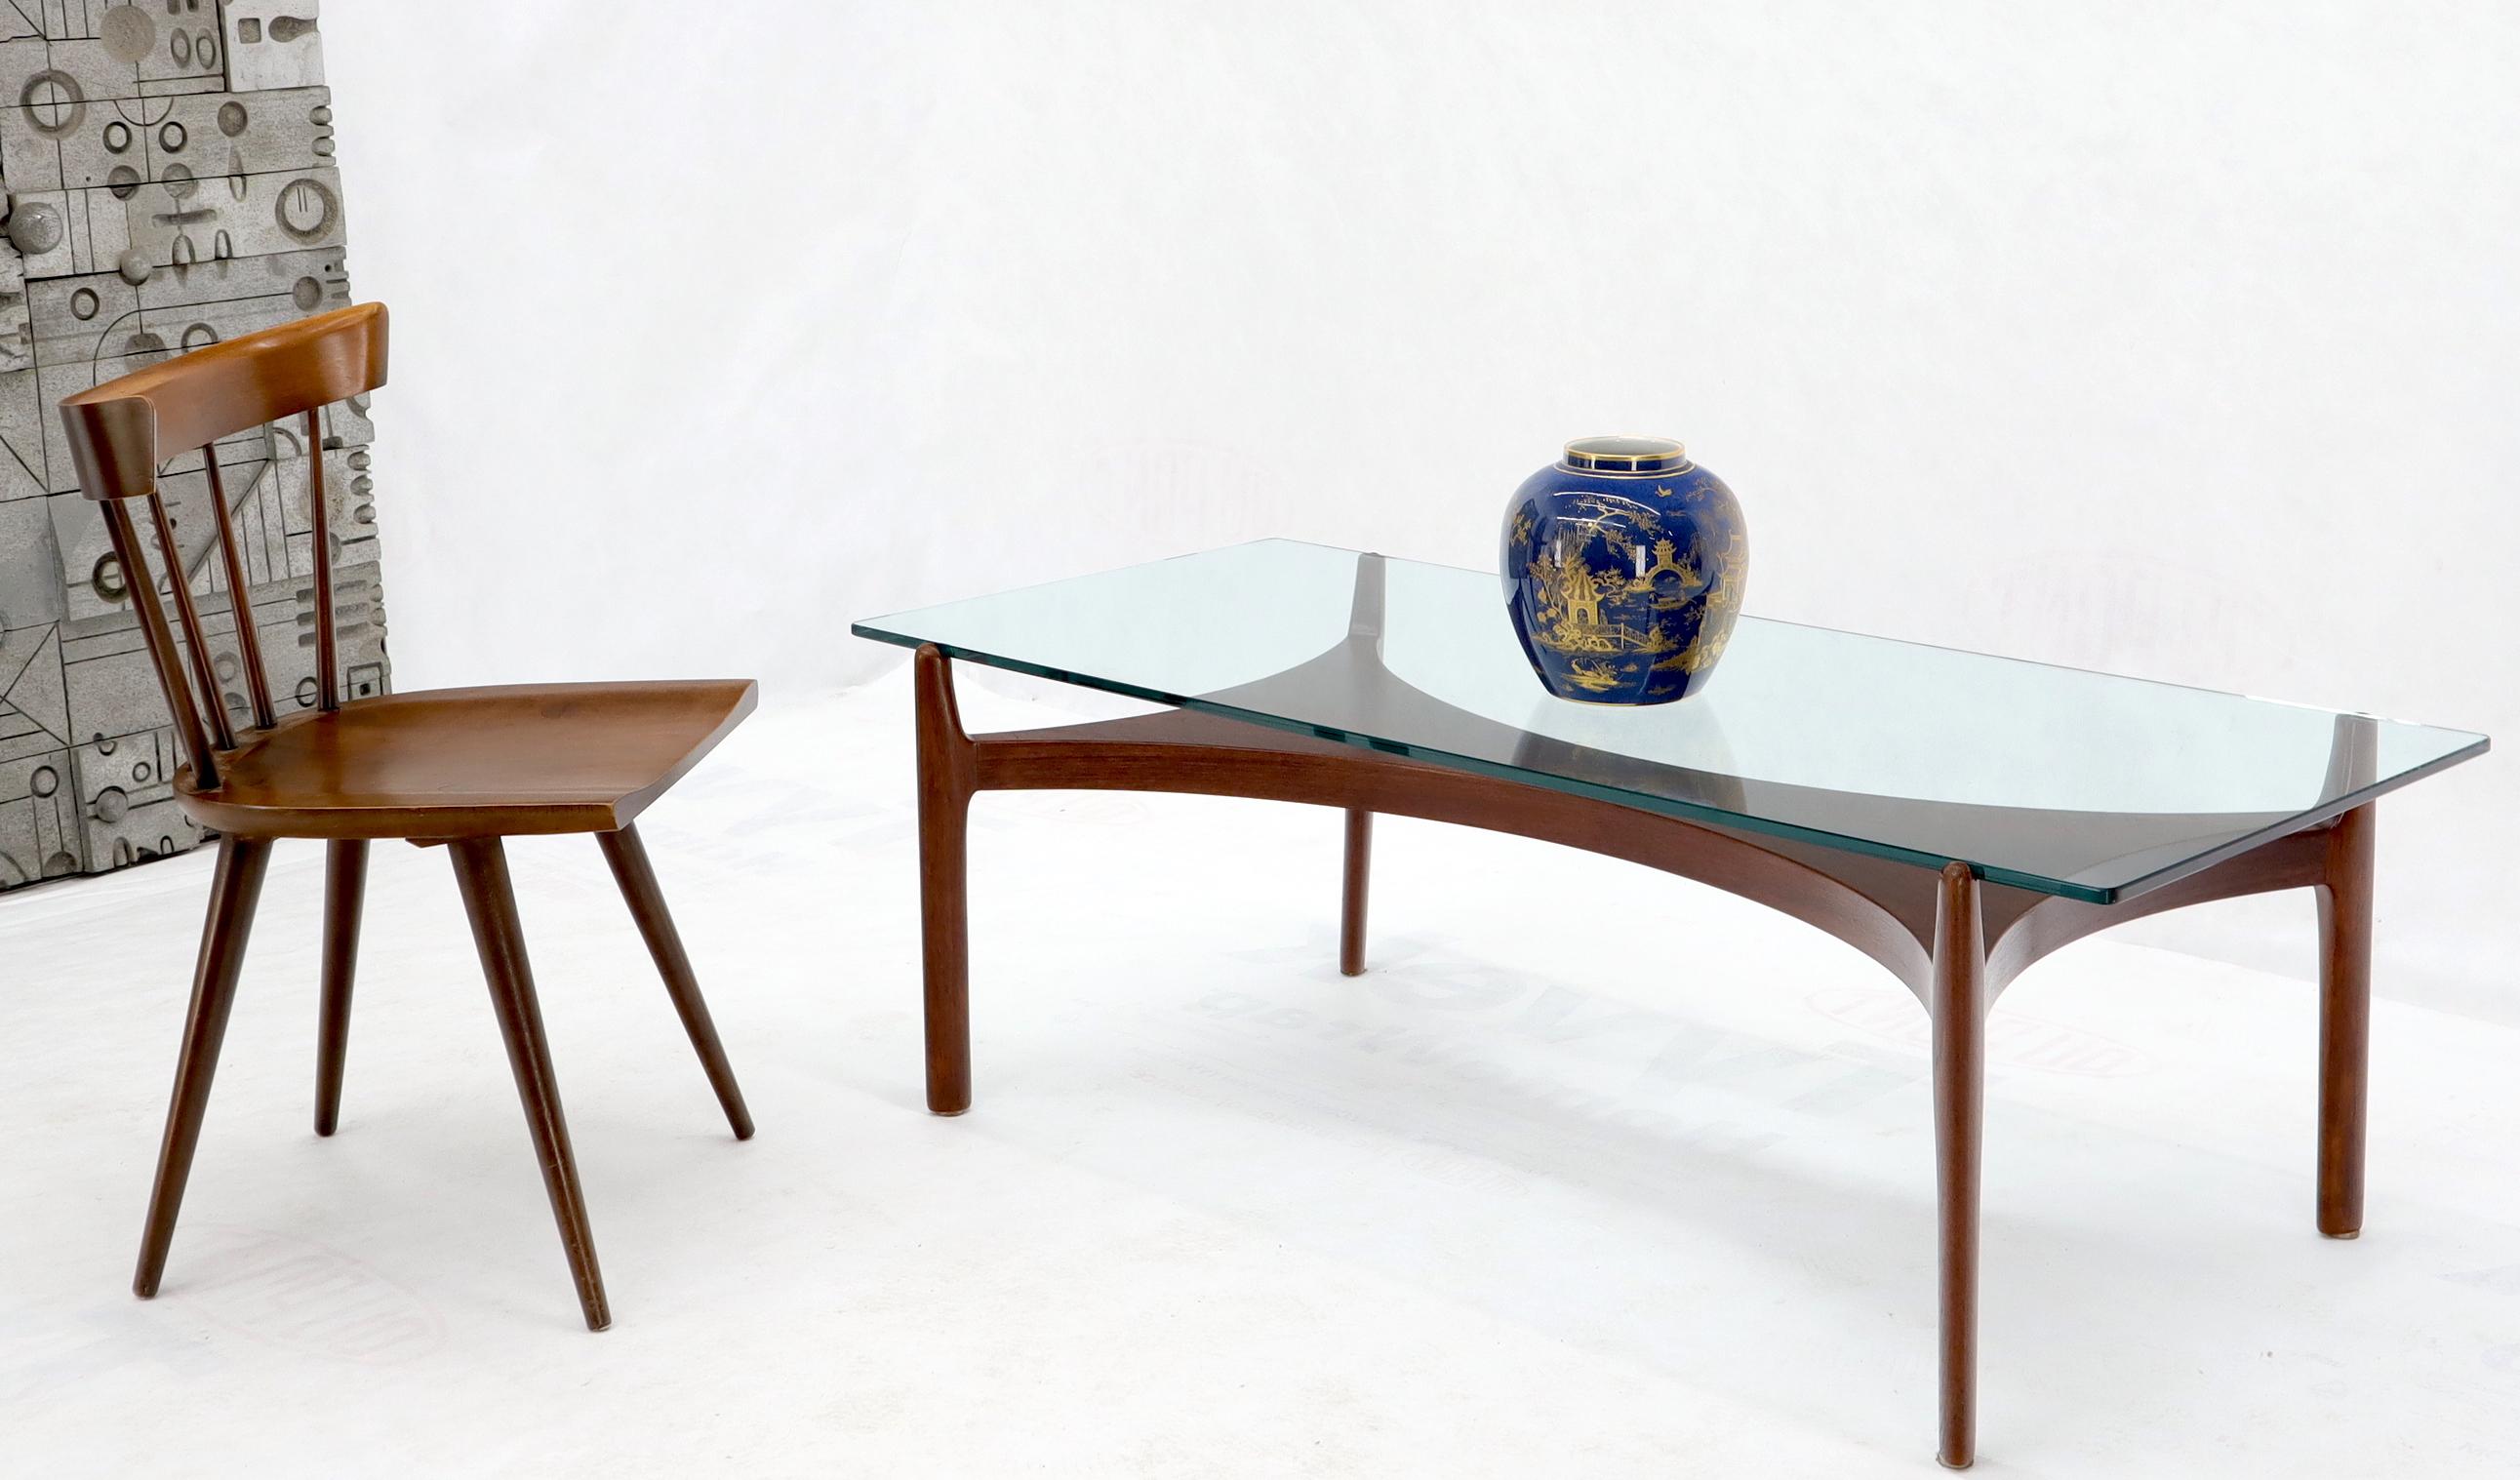 Danish Mid-Century Modern sculptural base low profile floating glass top coffee table. Adrian Pearsall decor.